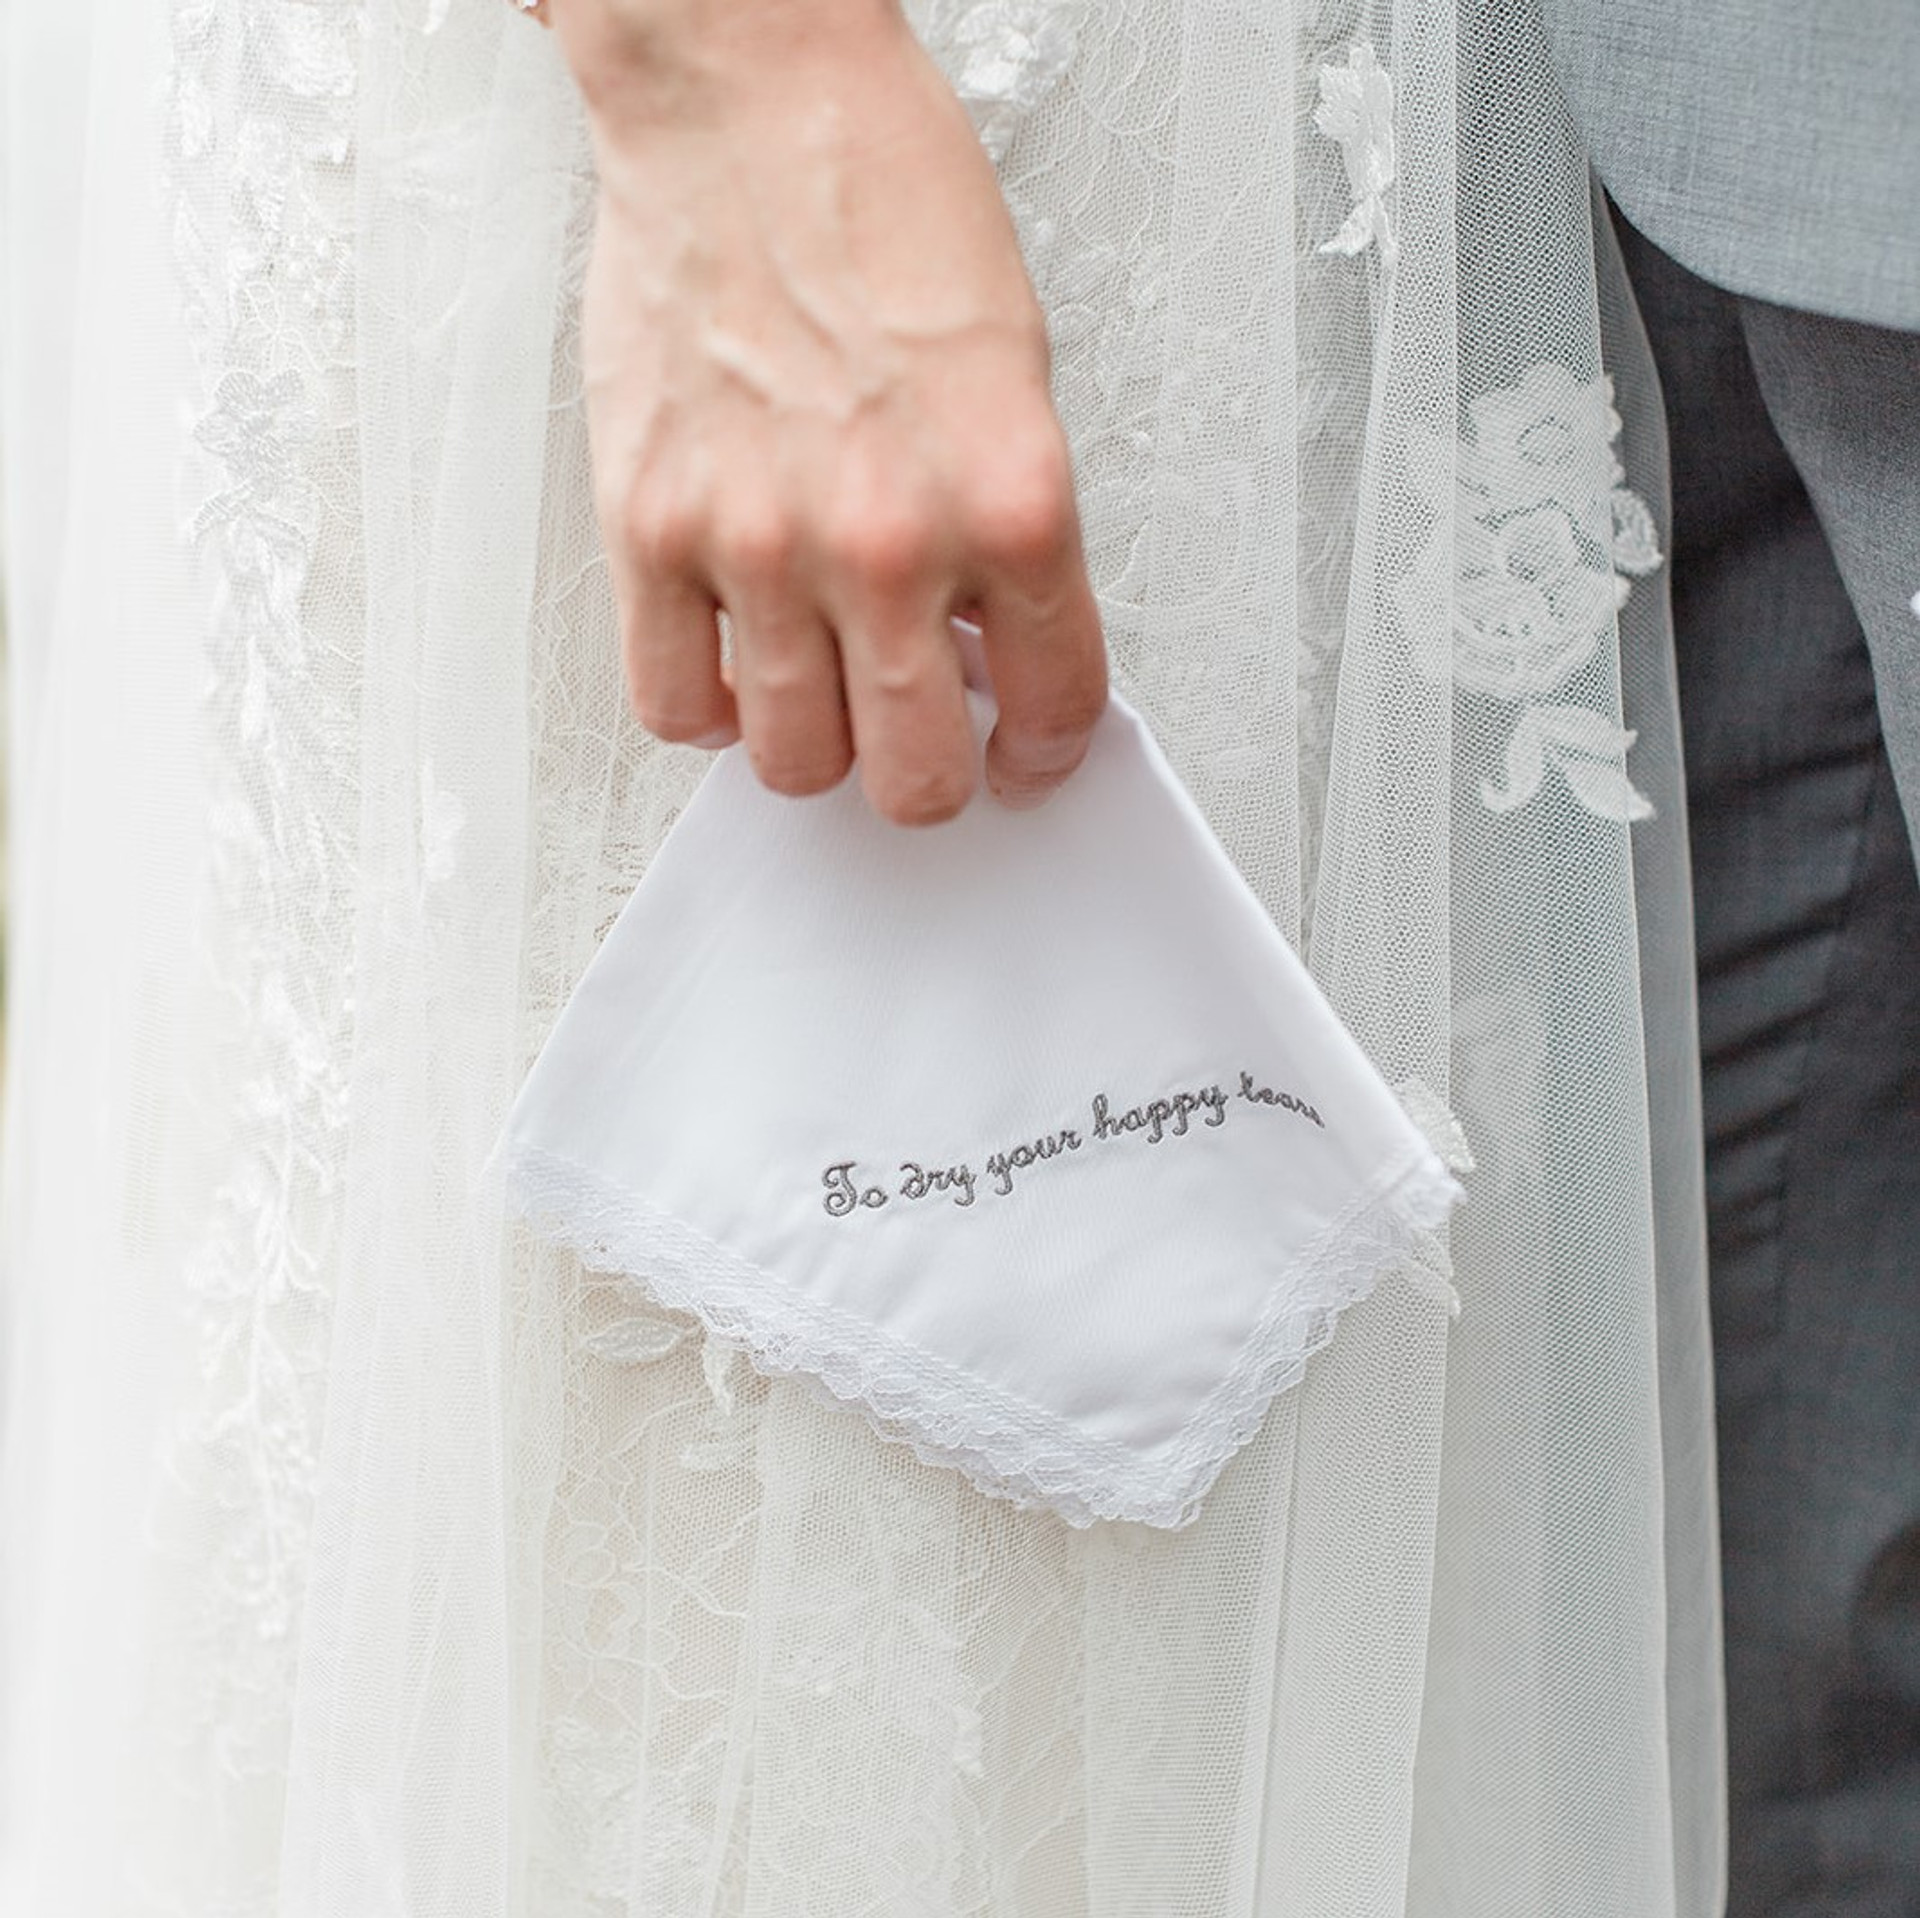 Dainty White Lace Wedding Handkerchief | Embroidered & Monogrammed